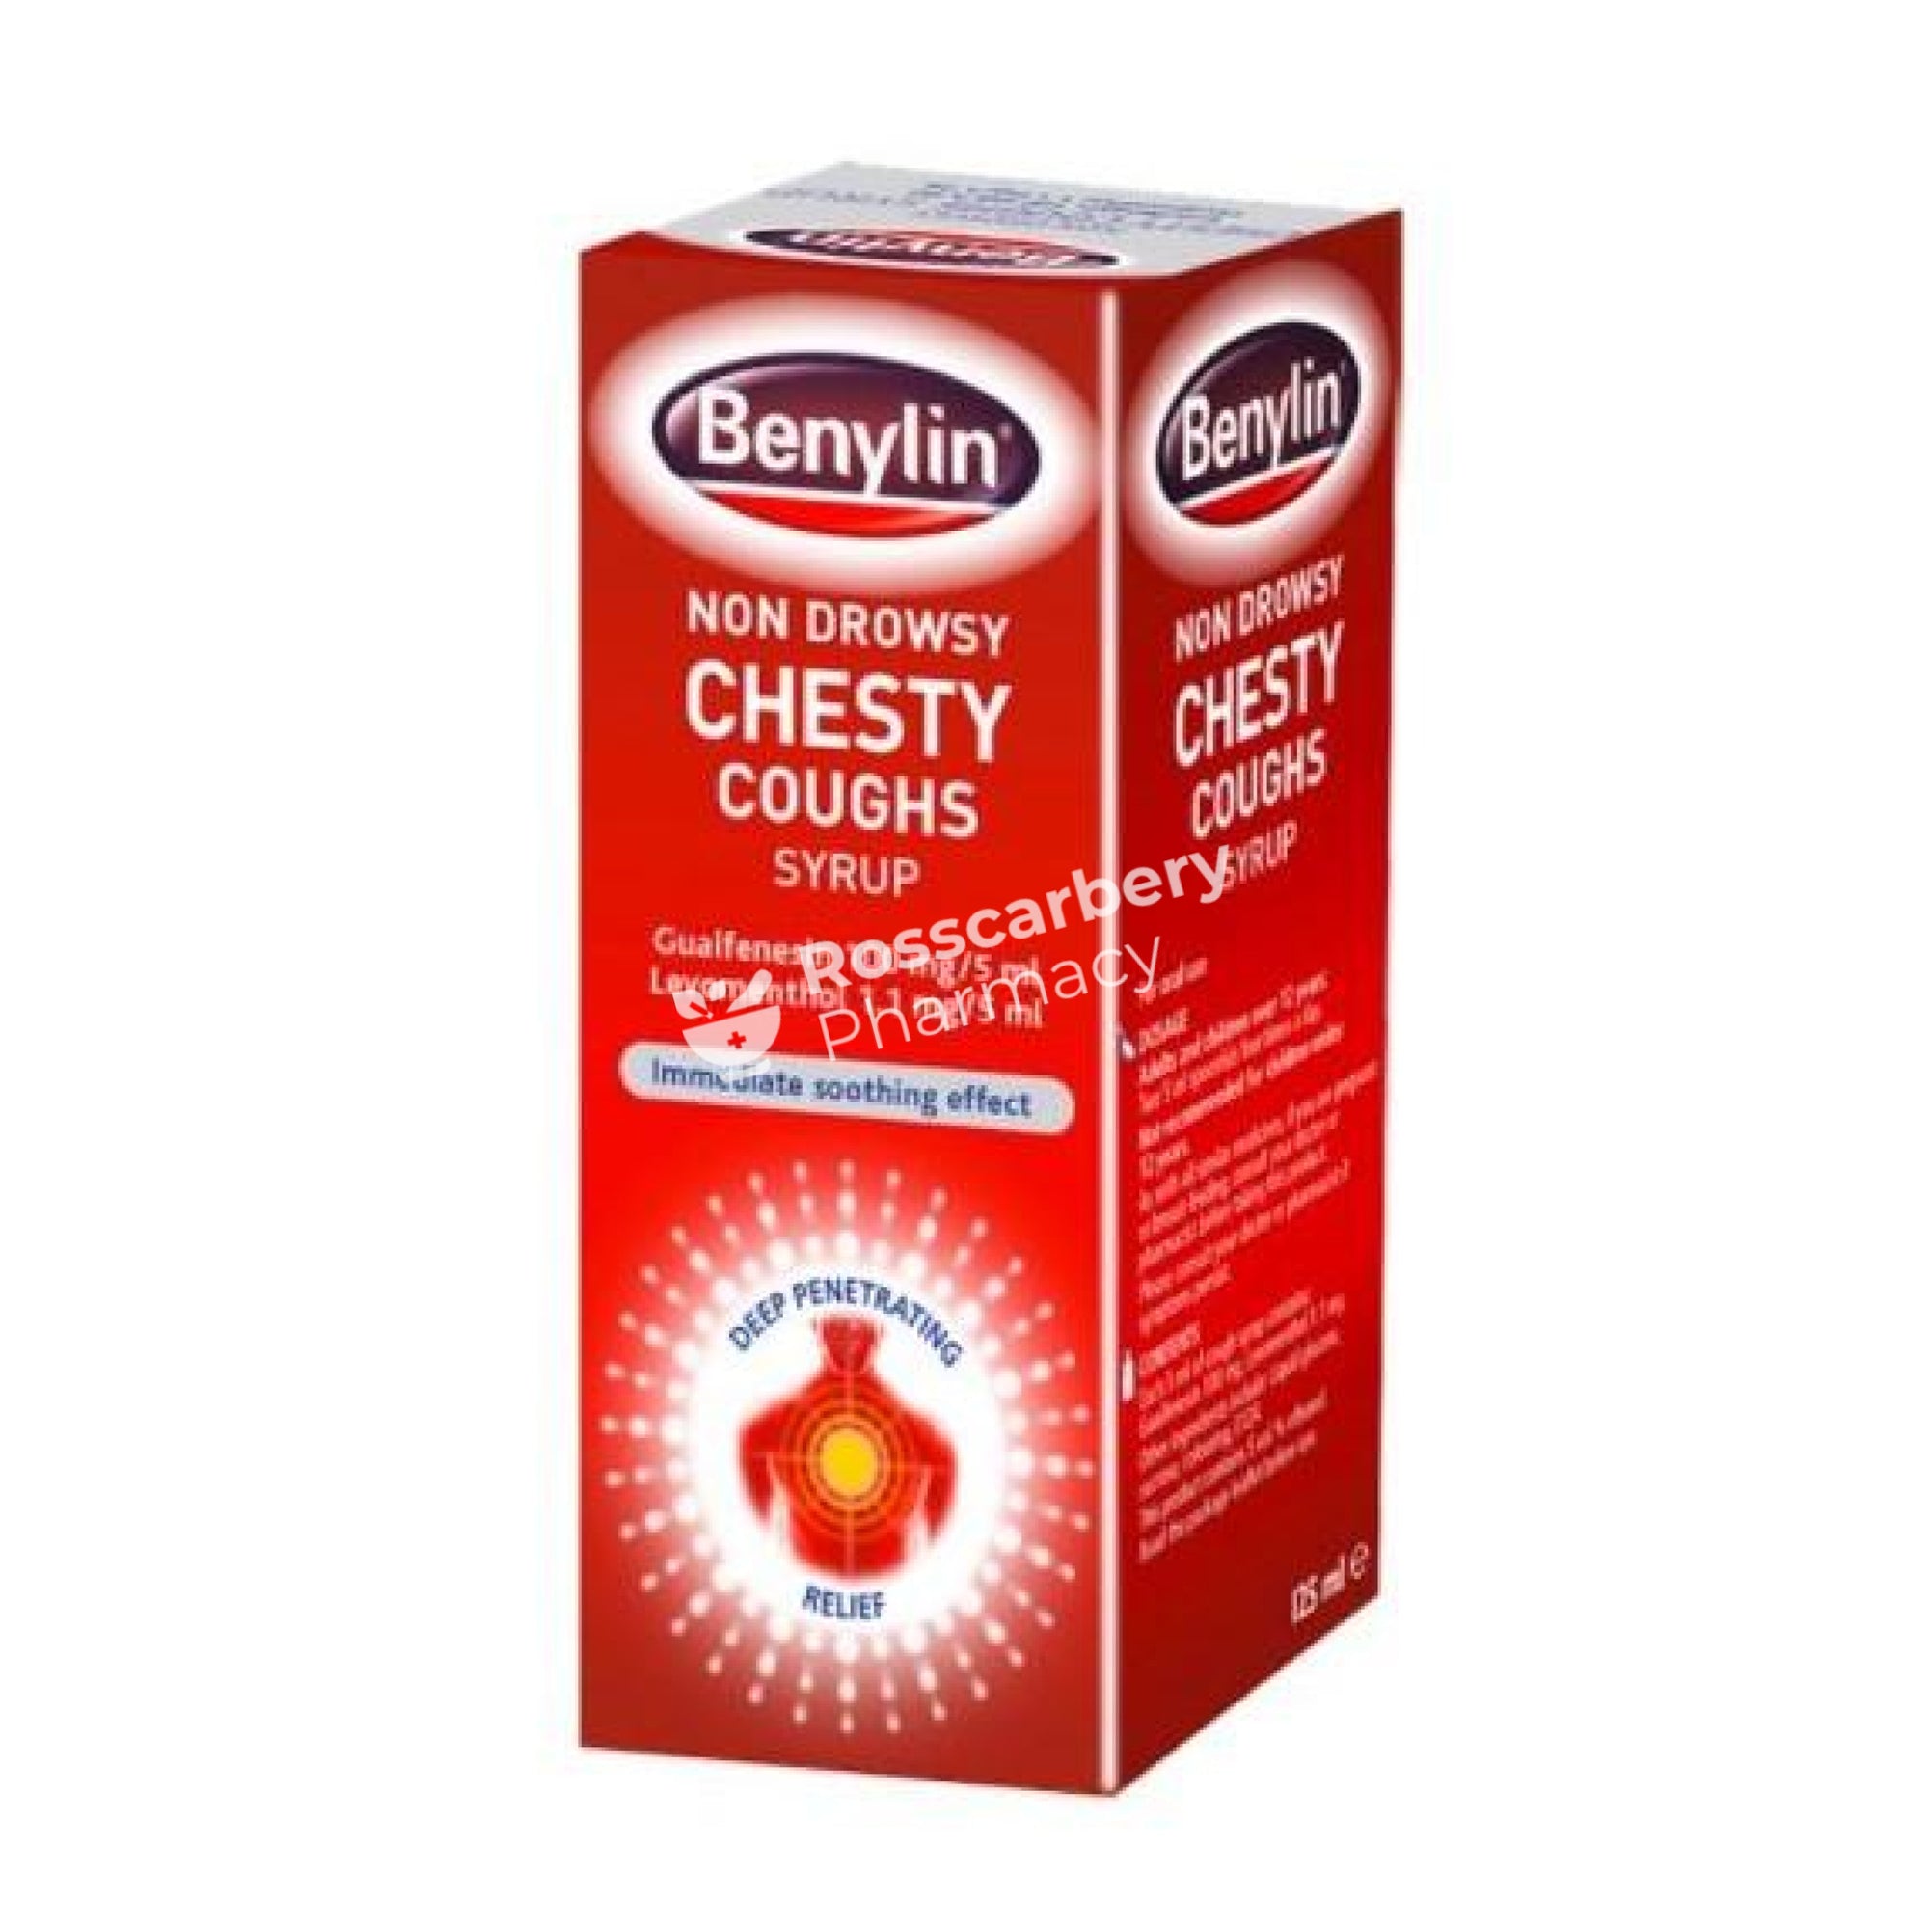 Benylin Non-Drowsy Chesty Cough Syrup Bottles